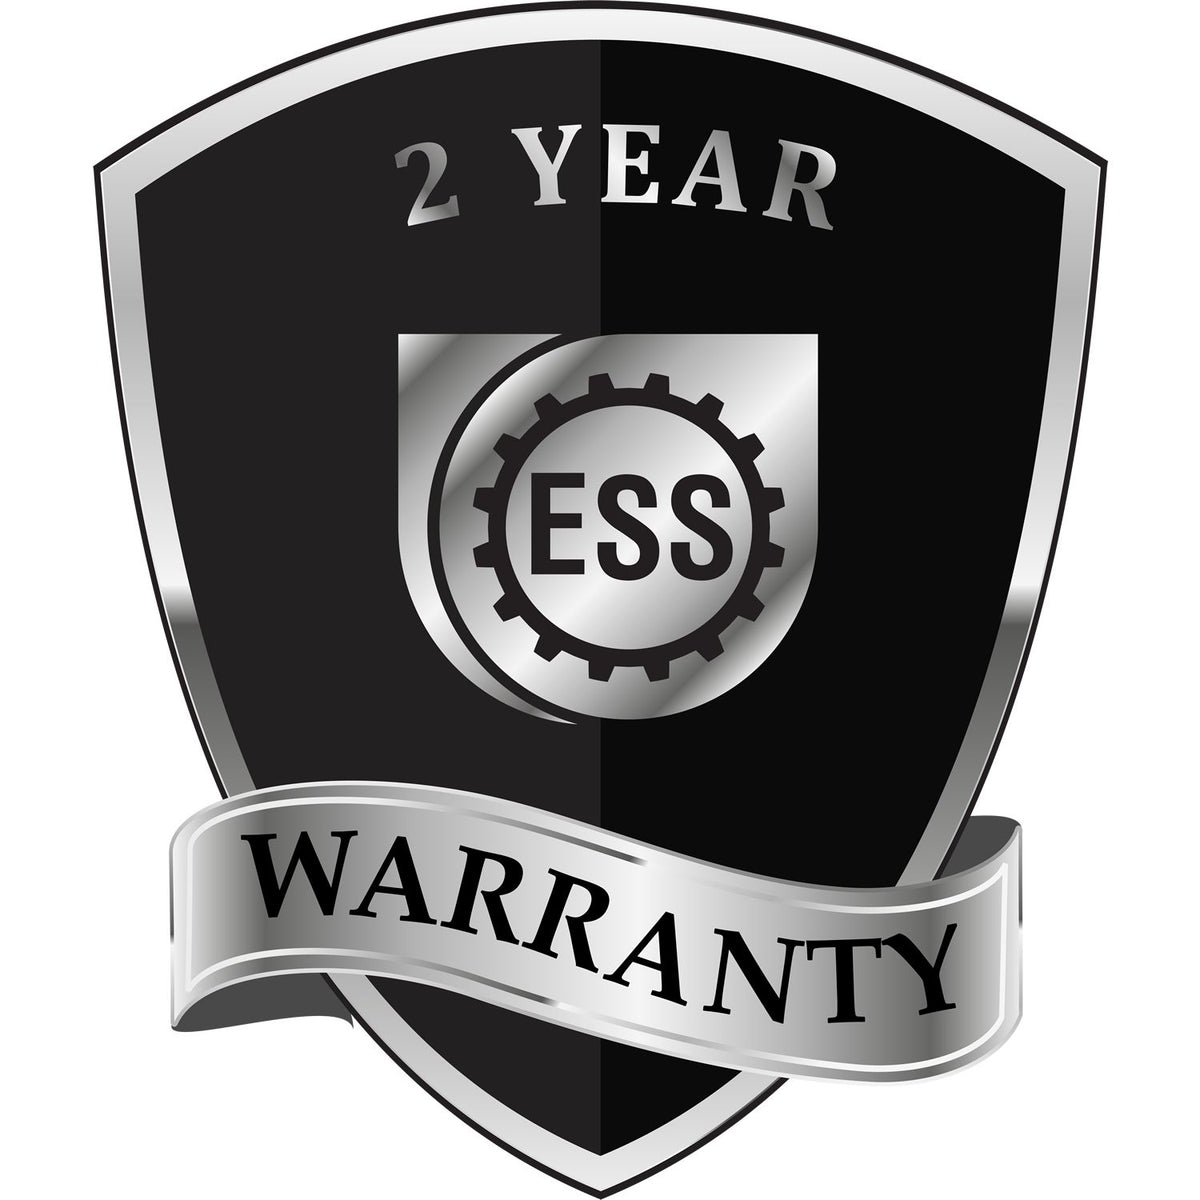 A badge or emblem showing a warranty icon for the Missouri Desk Architect Embossing Seal